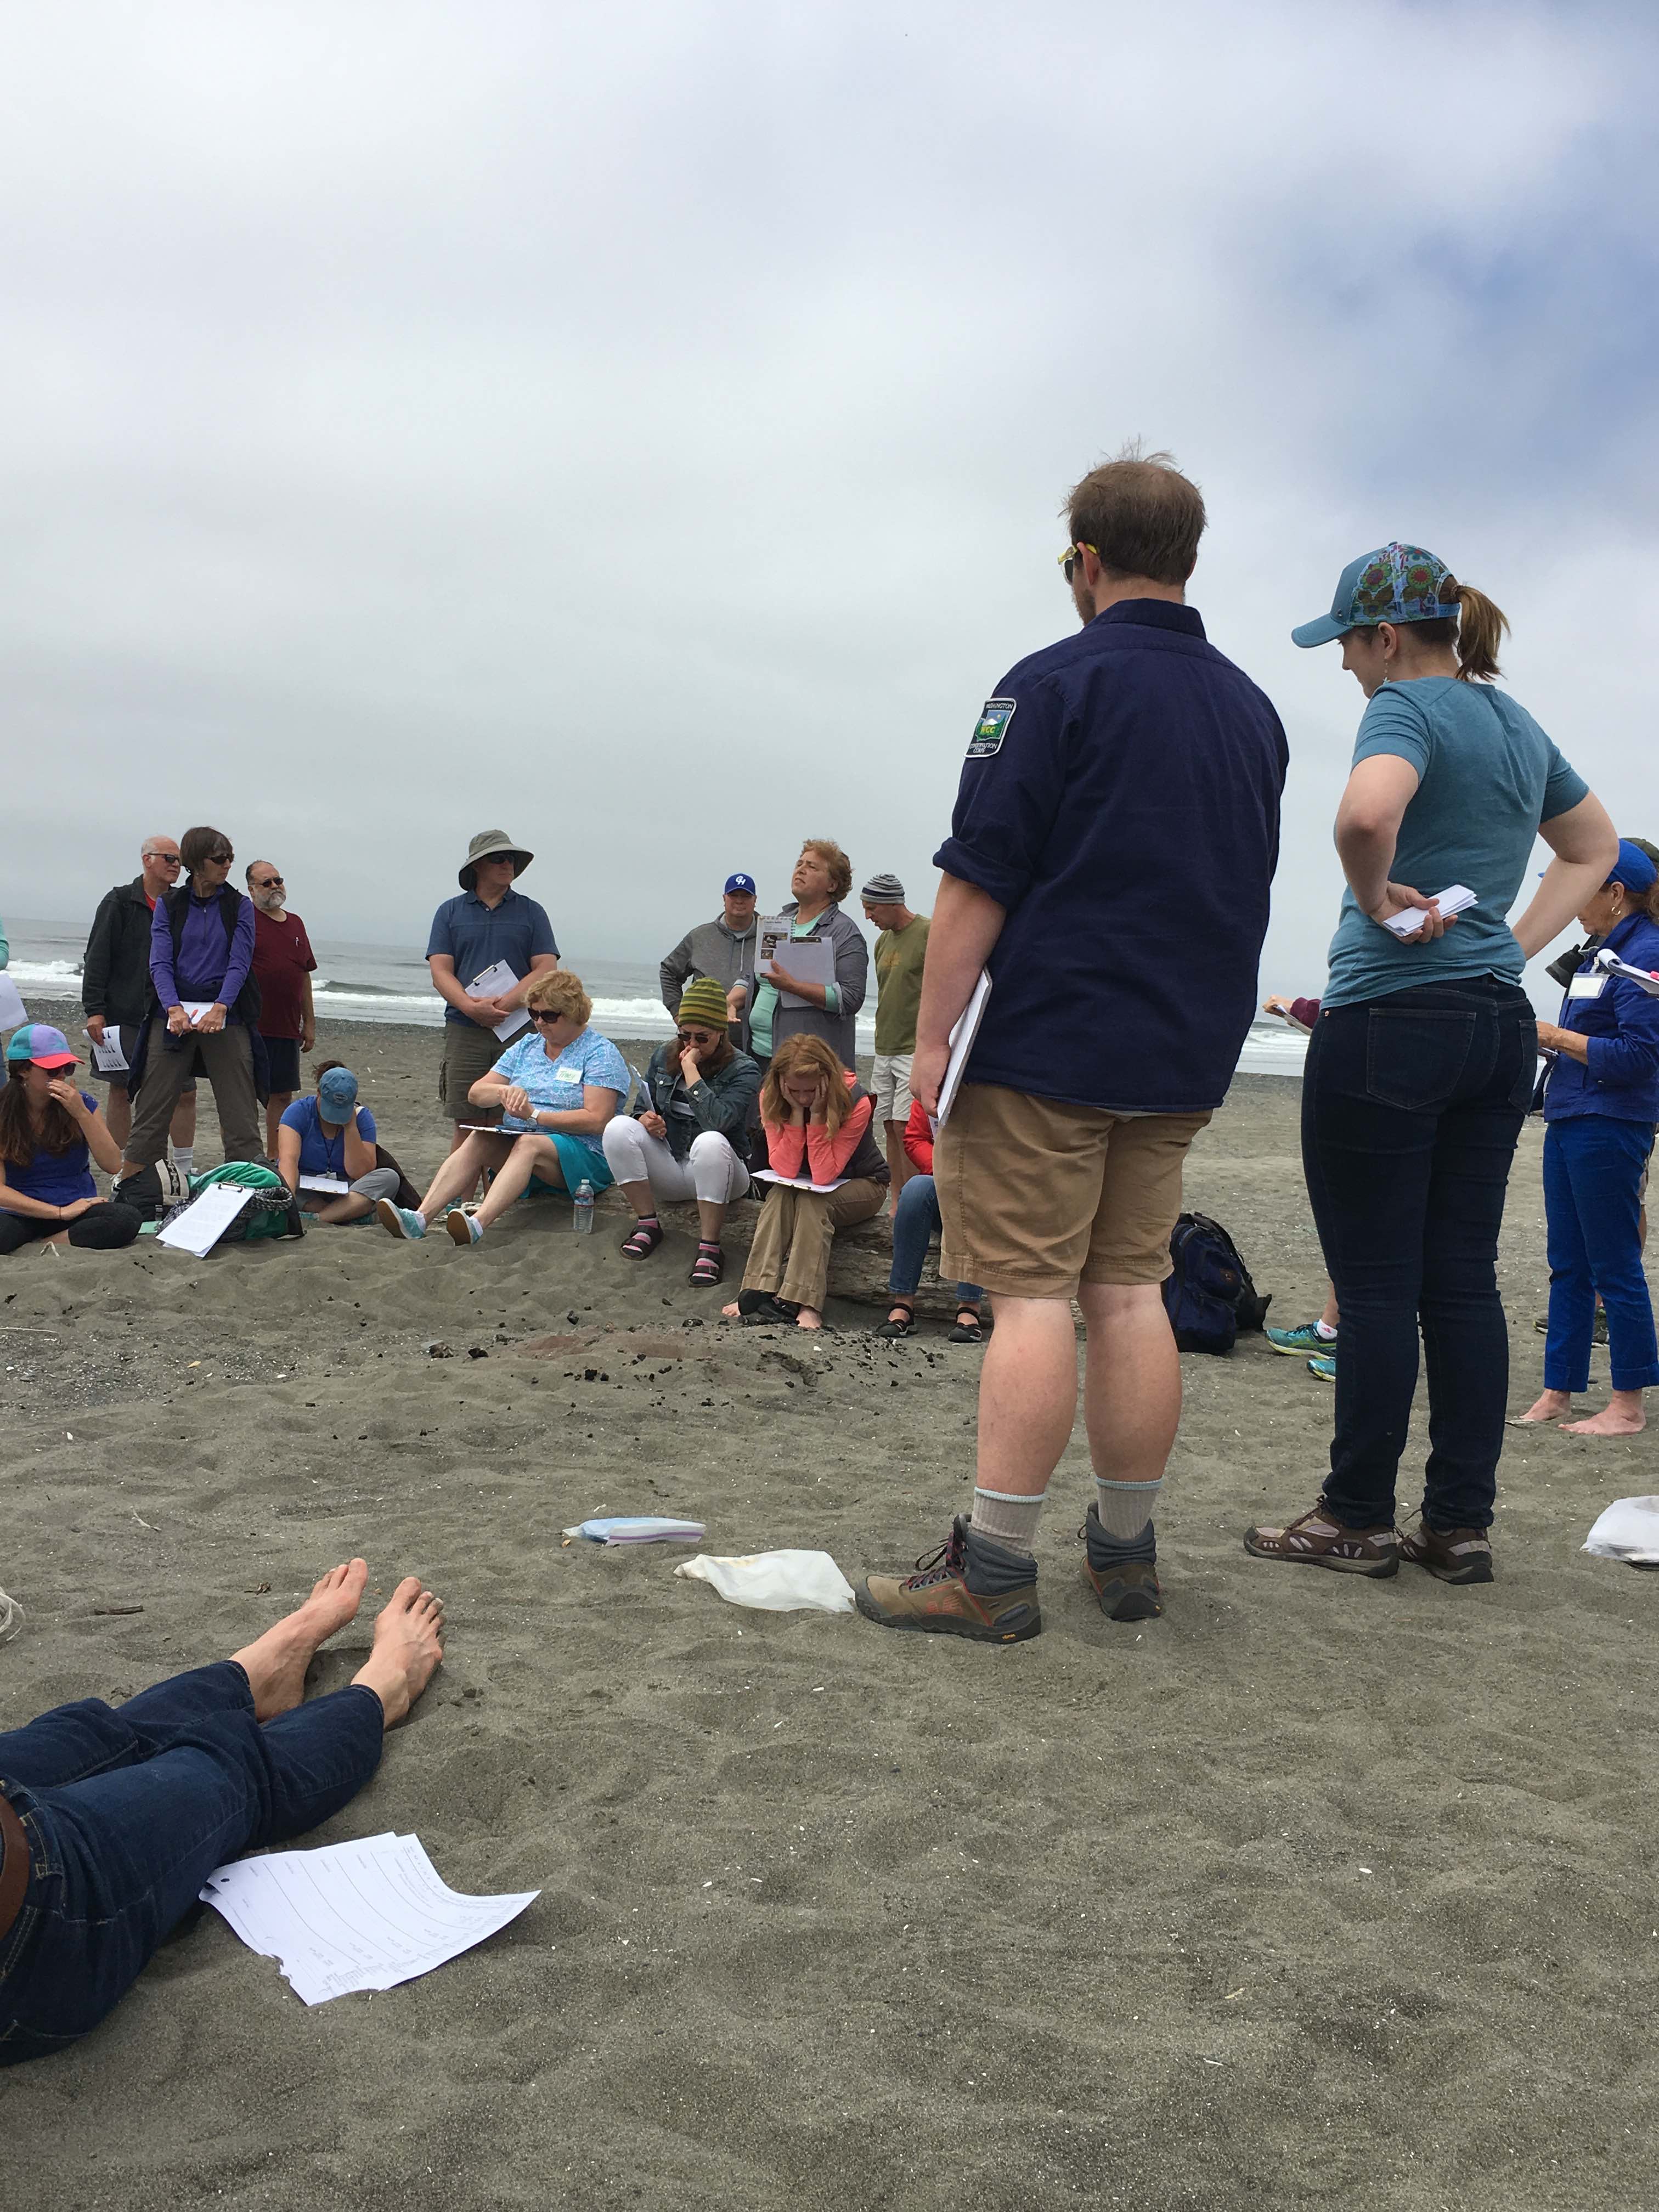 Rachel Stendahl, Chehalis Basin Education Consortium, and Aleks Storvik, WCC Americorps with Nisqually River Education Project, teaching some citizen science on the beach with UW's COASST protocol